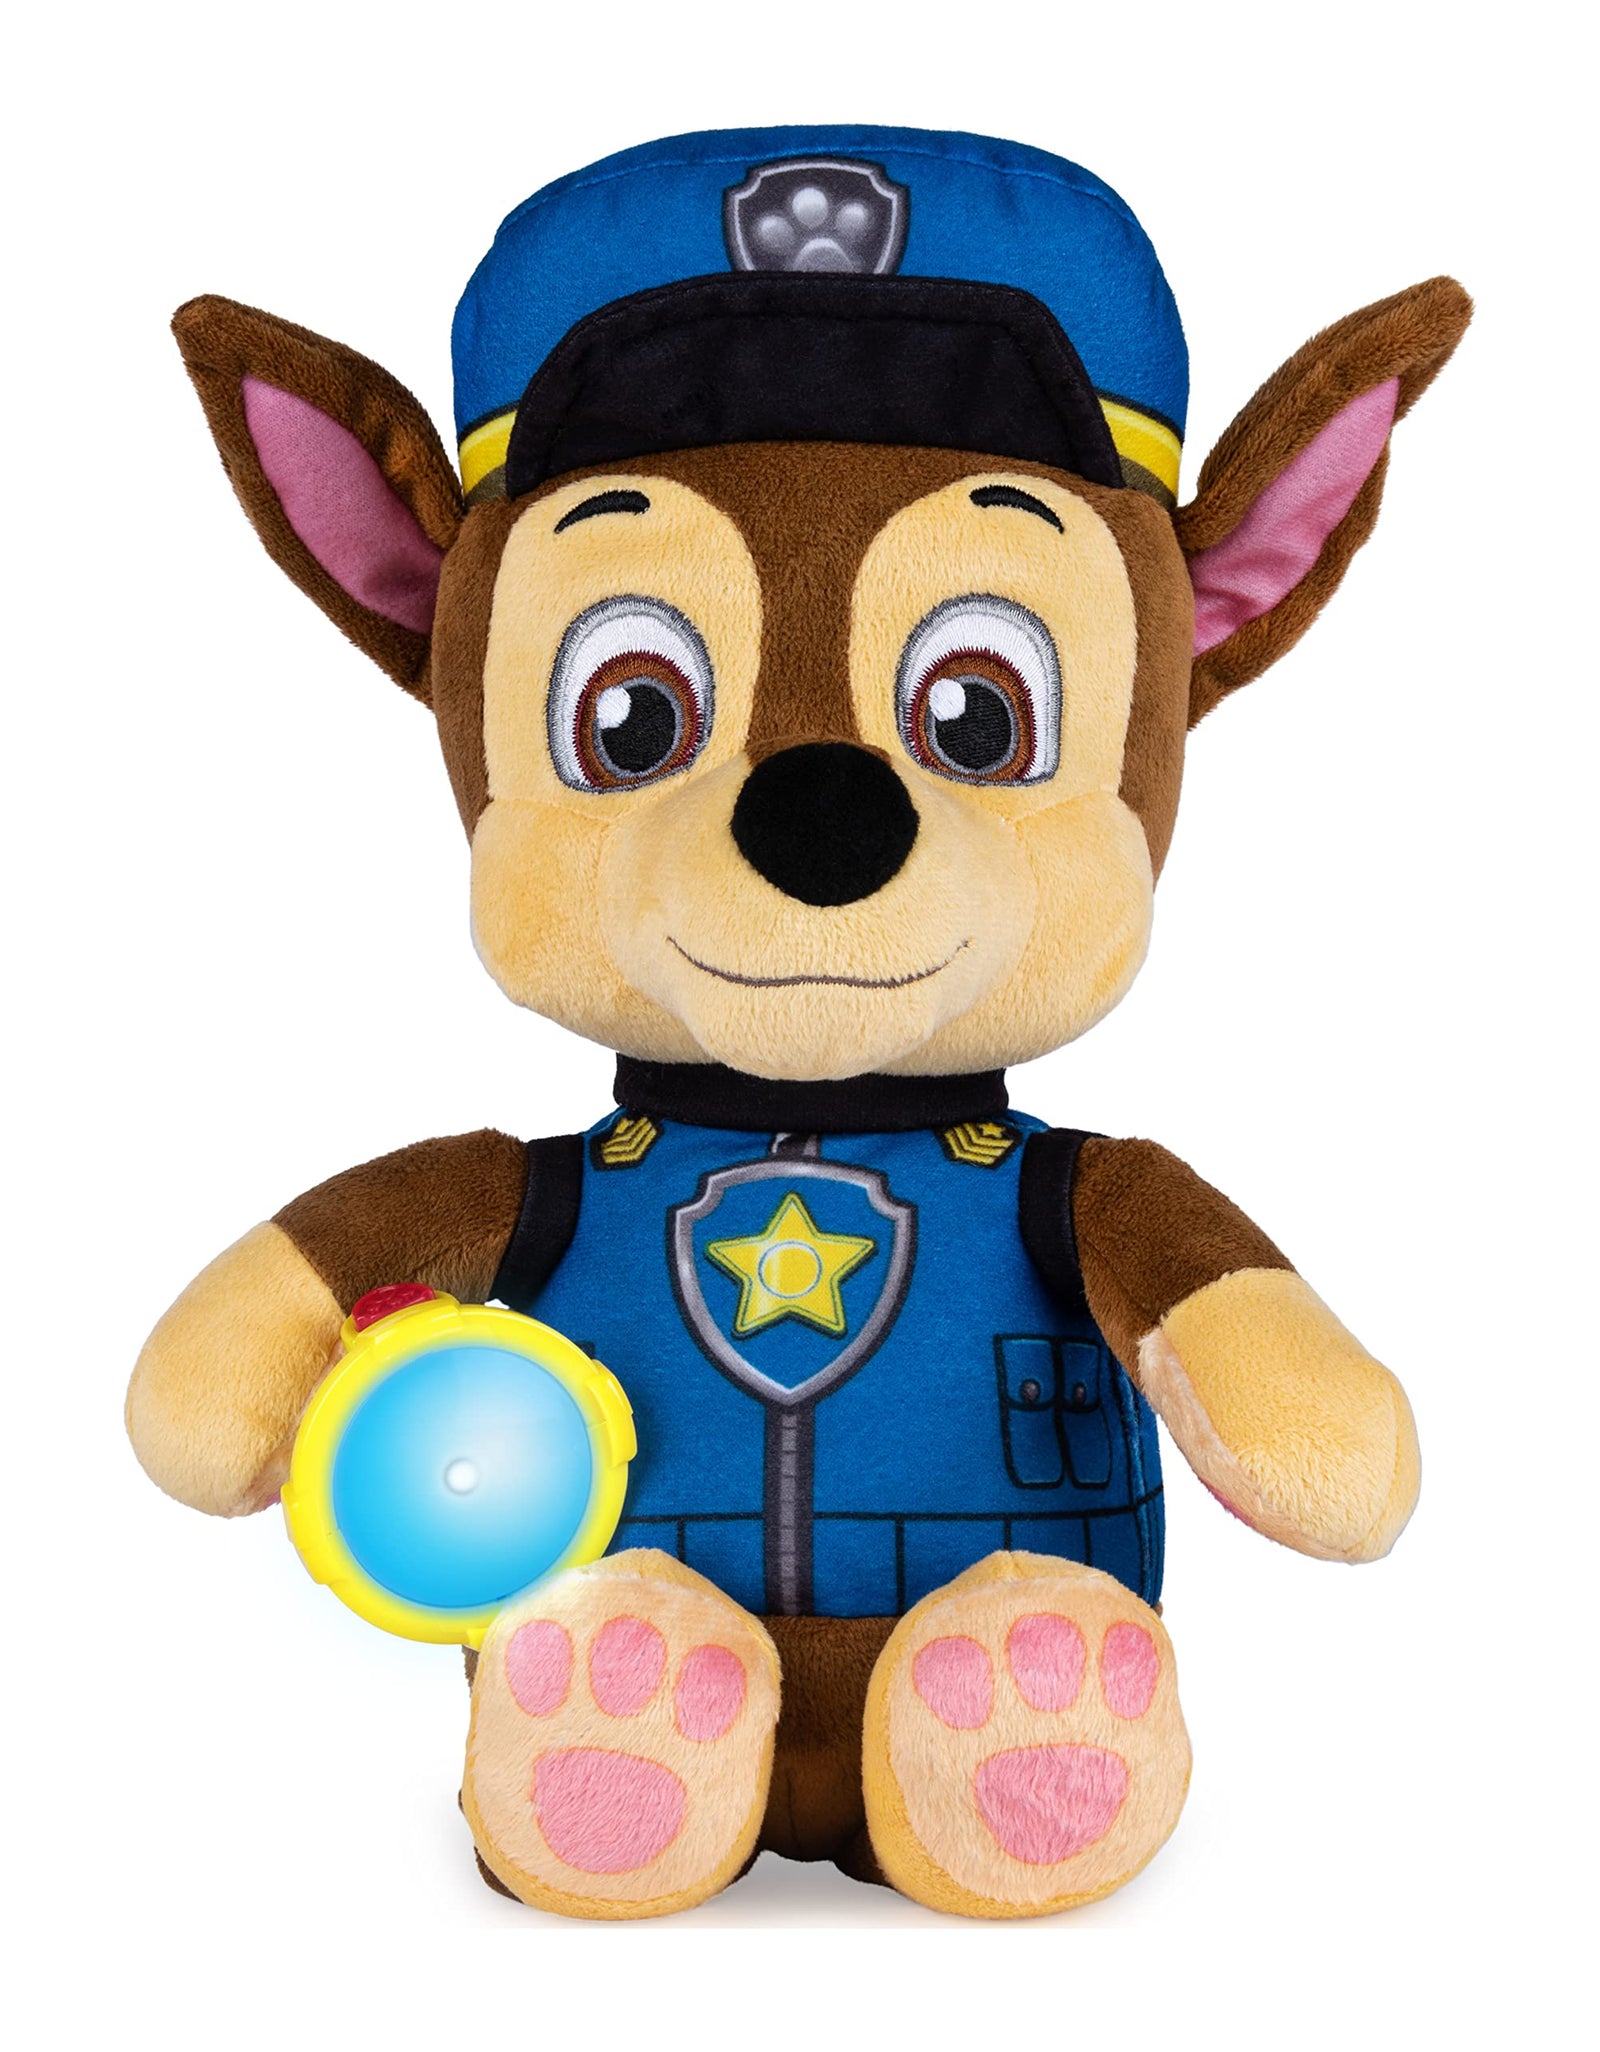 Paw Patrol, Snuggle Up Skye Plush with Flashlight and Sounds, for Kids Aged 3 and Up